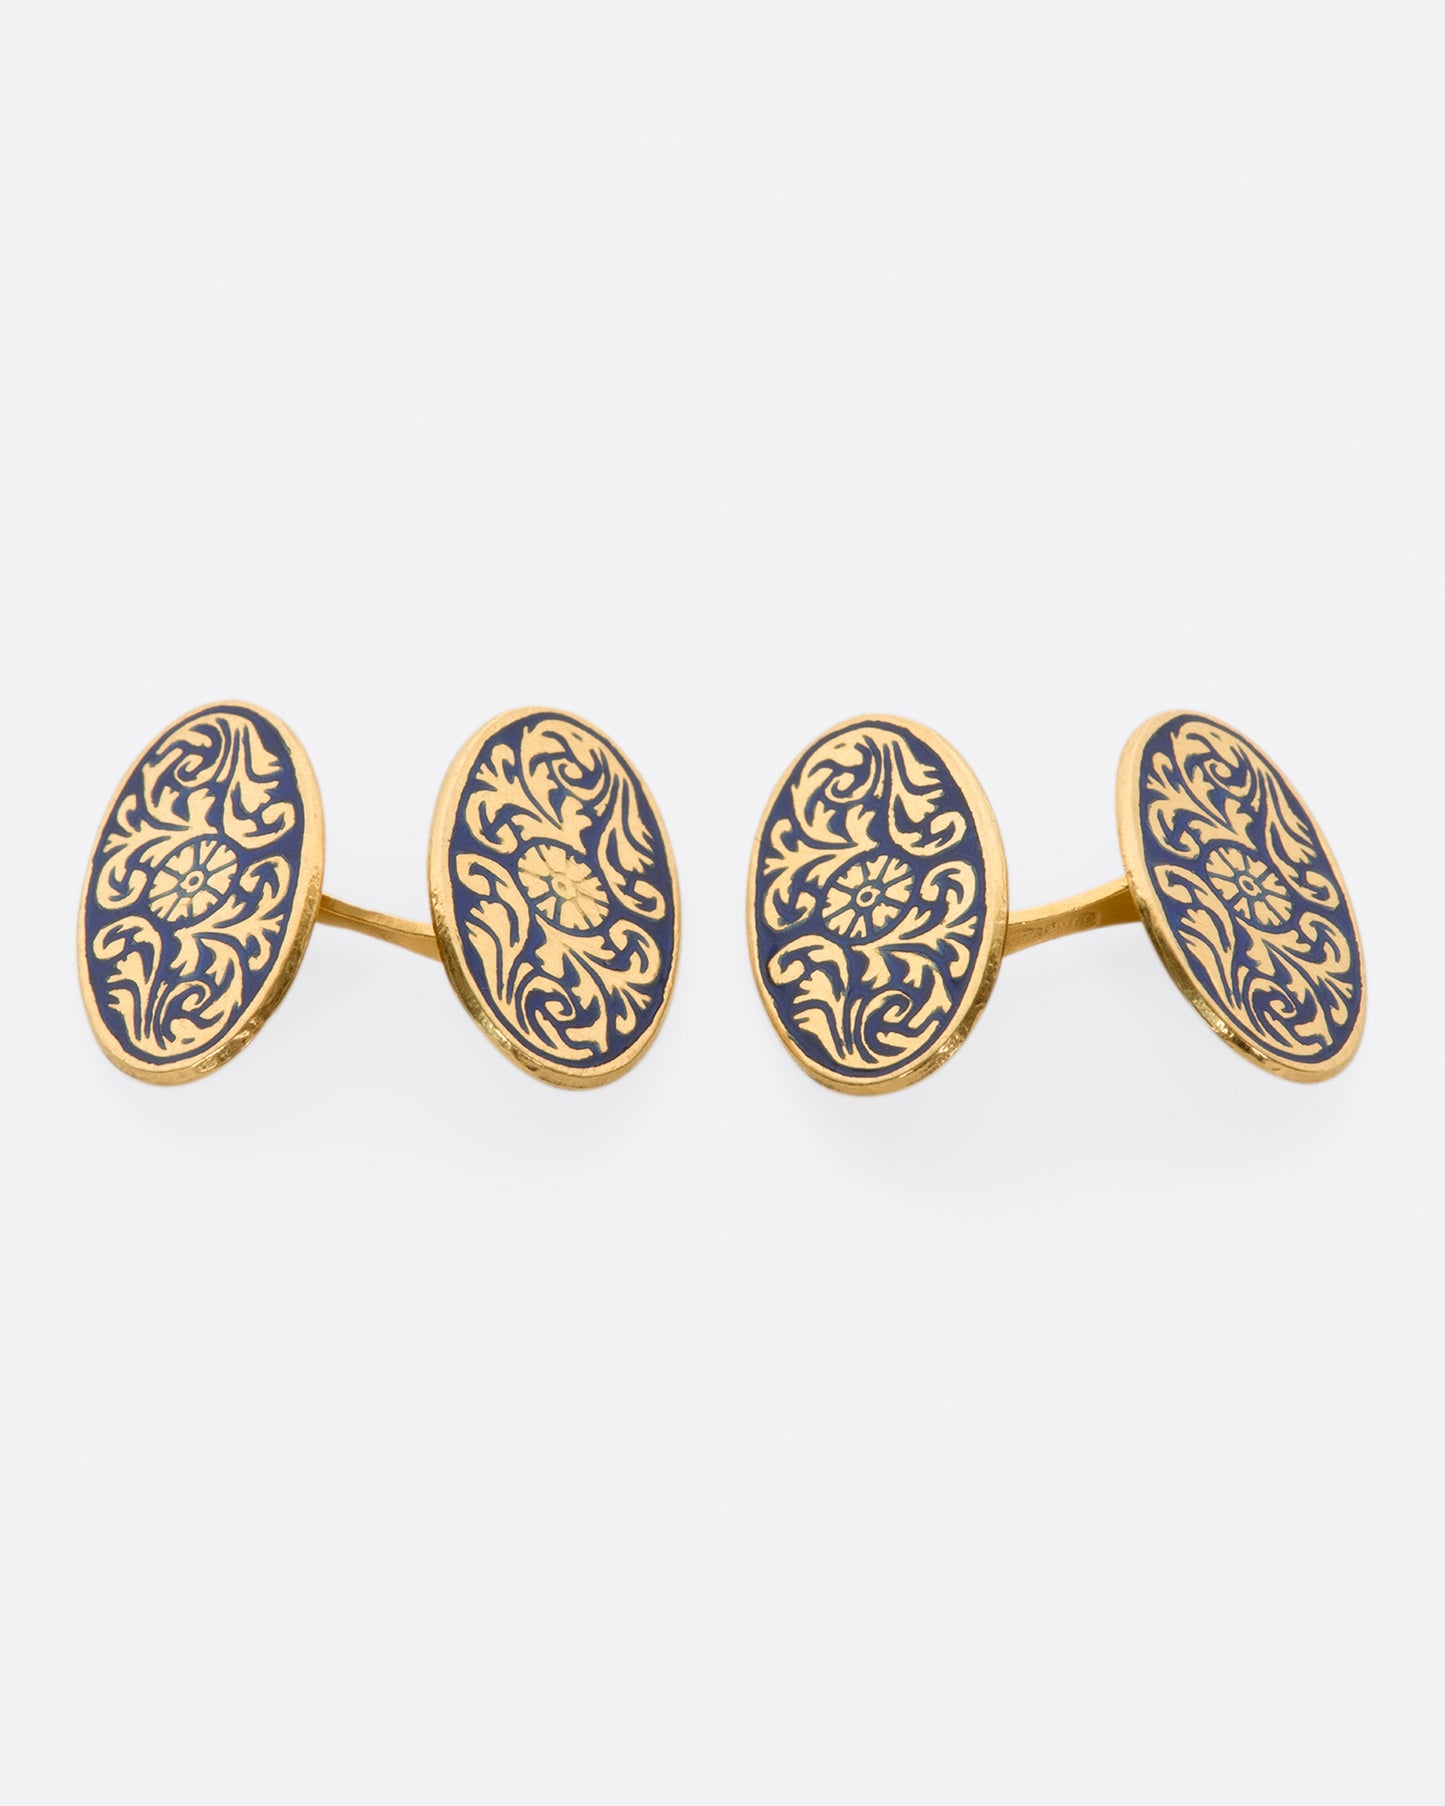 A pair of solid gold vintage cufflinks with intricate flourishes and contrasting dark blue enamel.